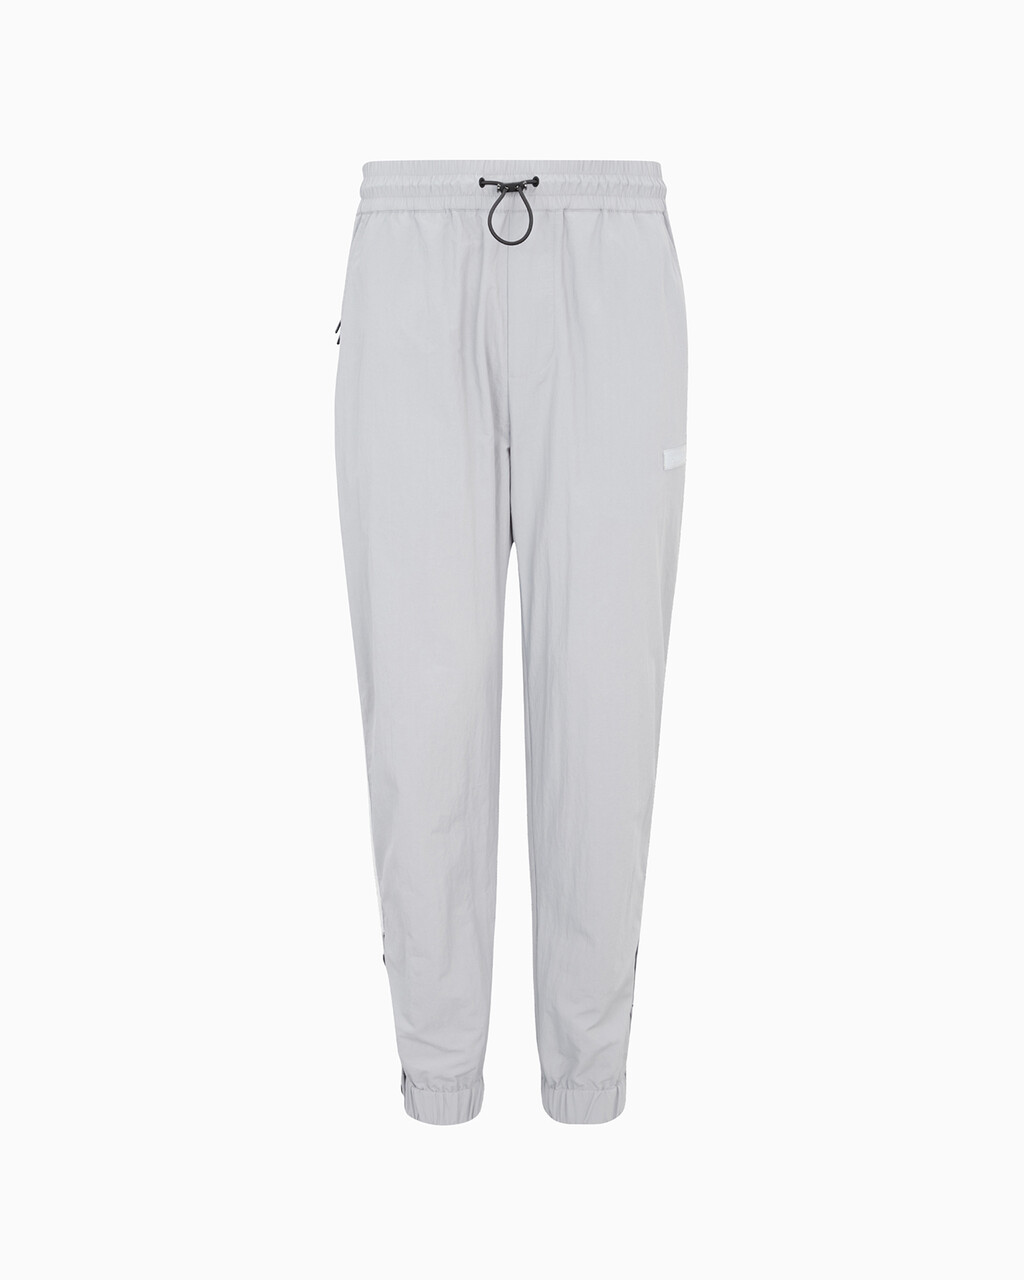 WOVEN TRACK PANTS, Marble Grey, hi-res